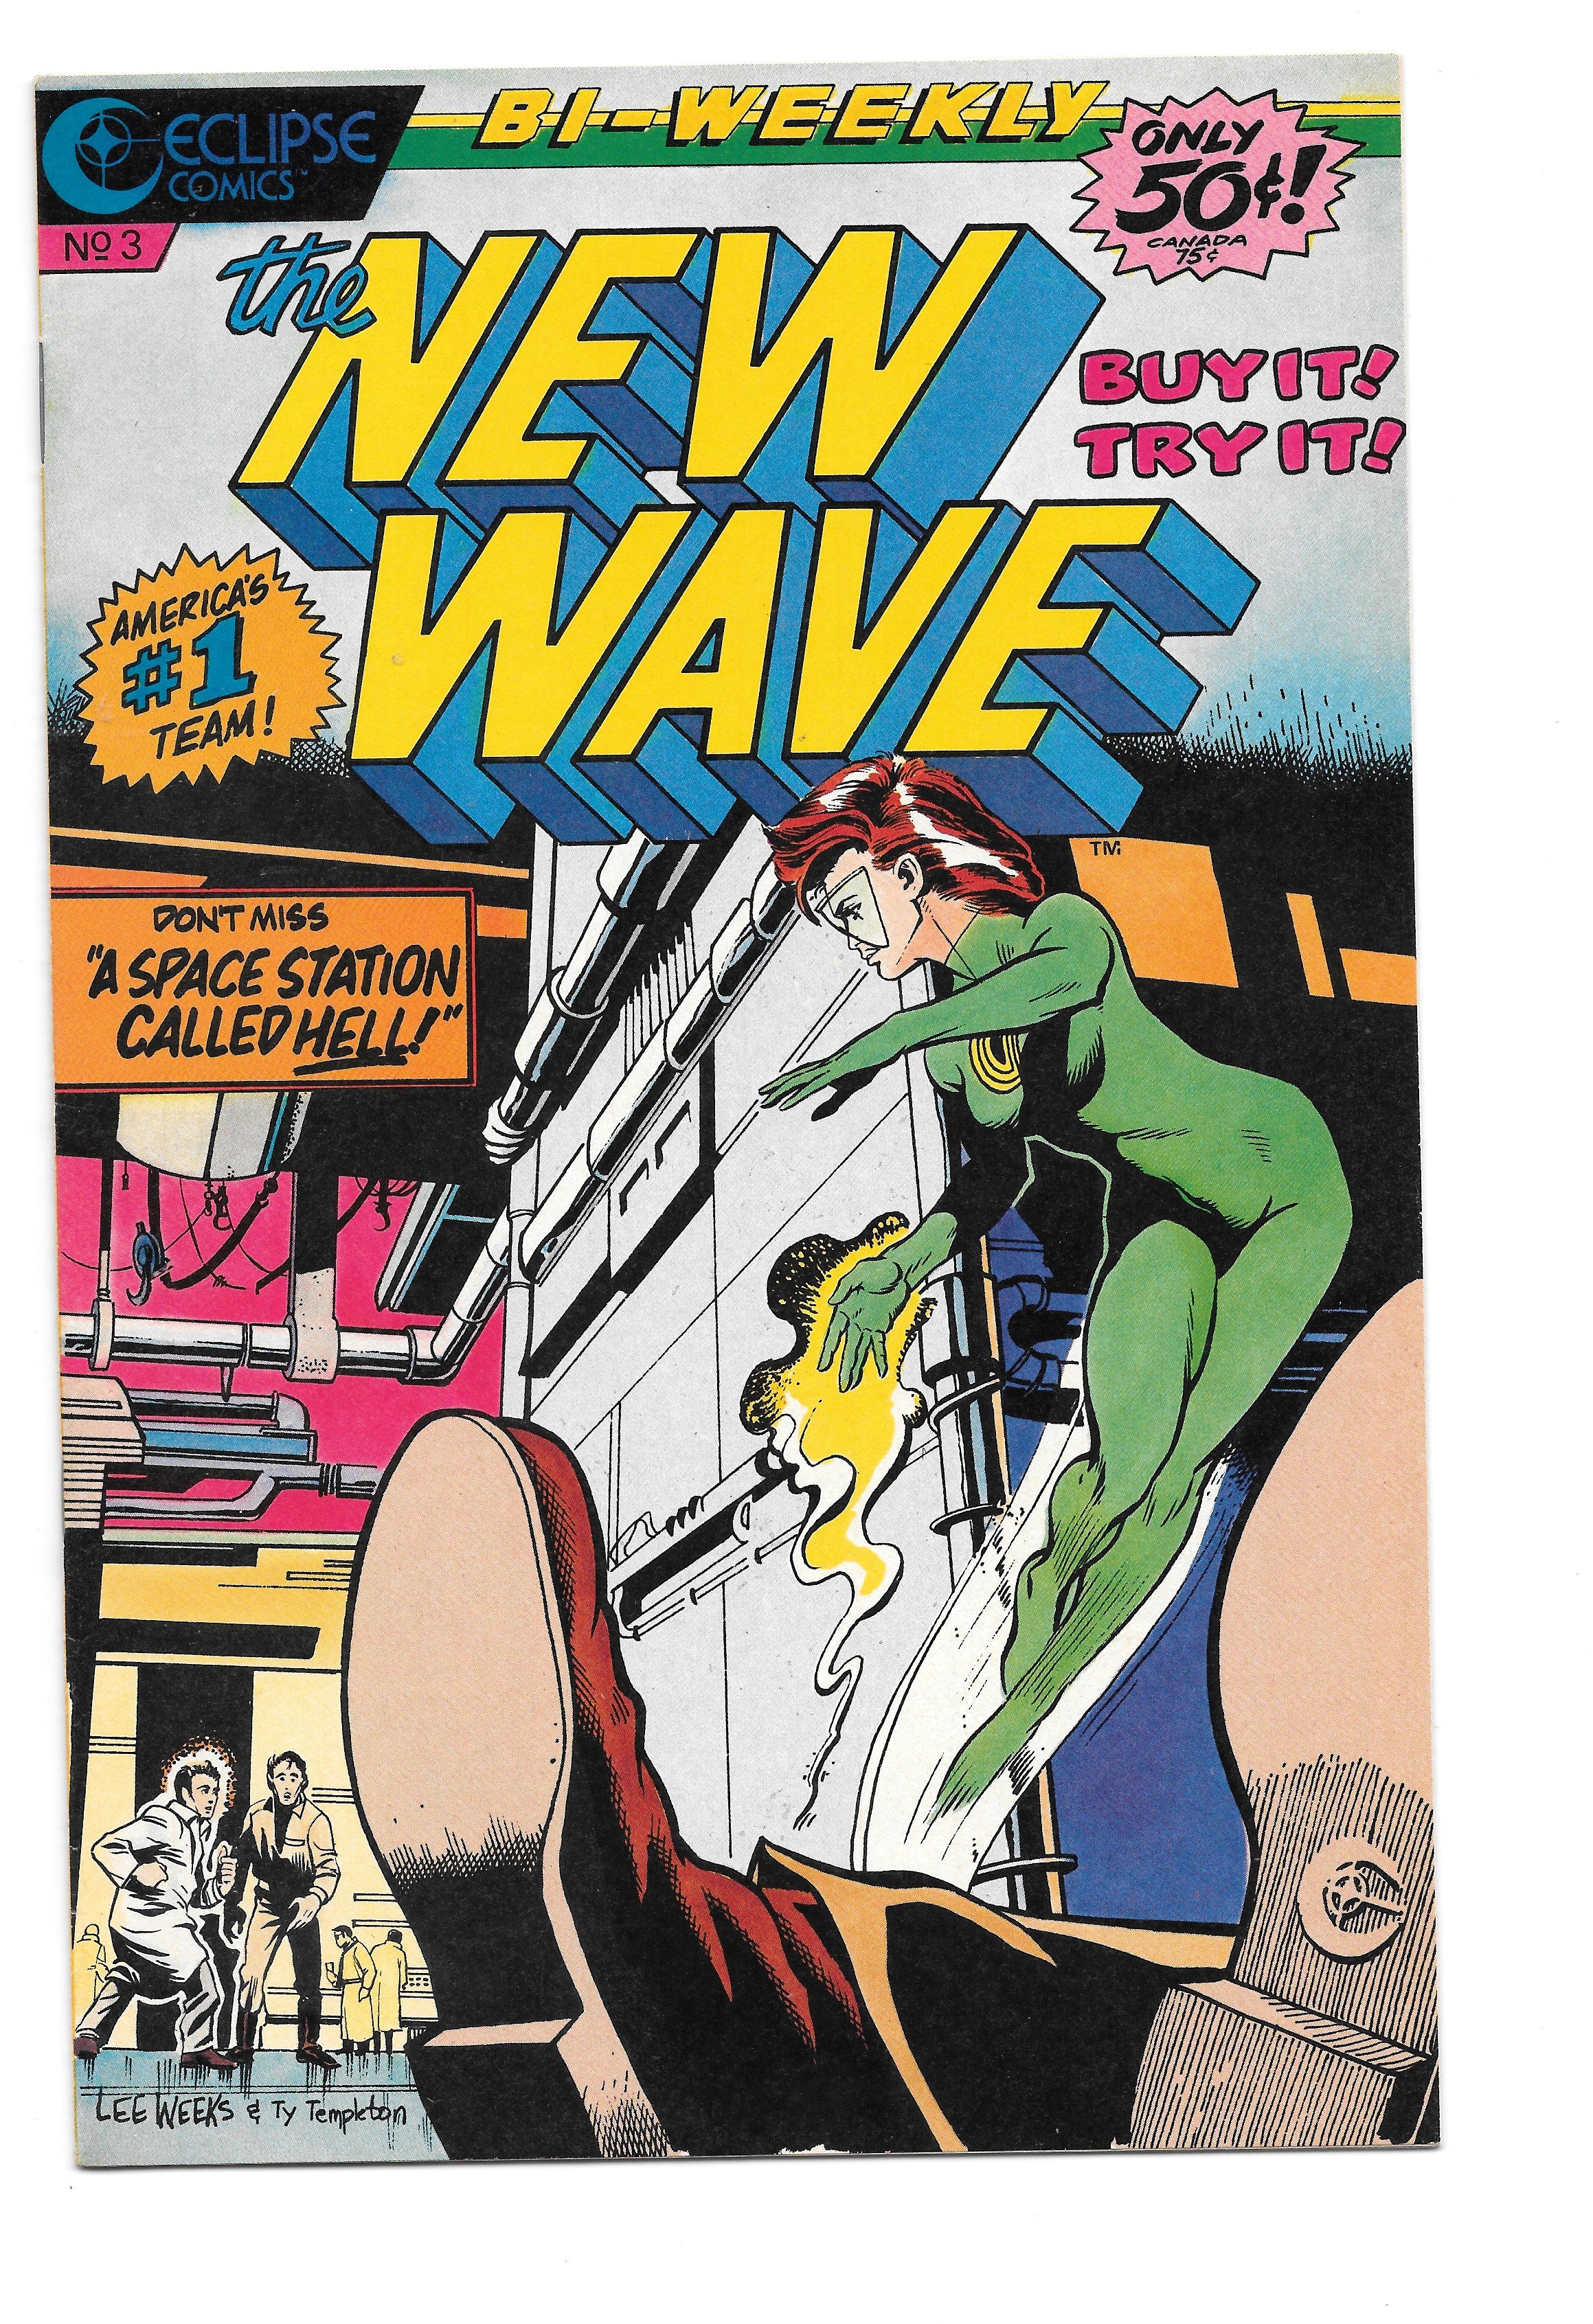 Photo of New Wave (1986)  Iss 3   Comic sold by Stronghold Collectibles